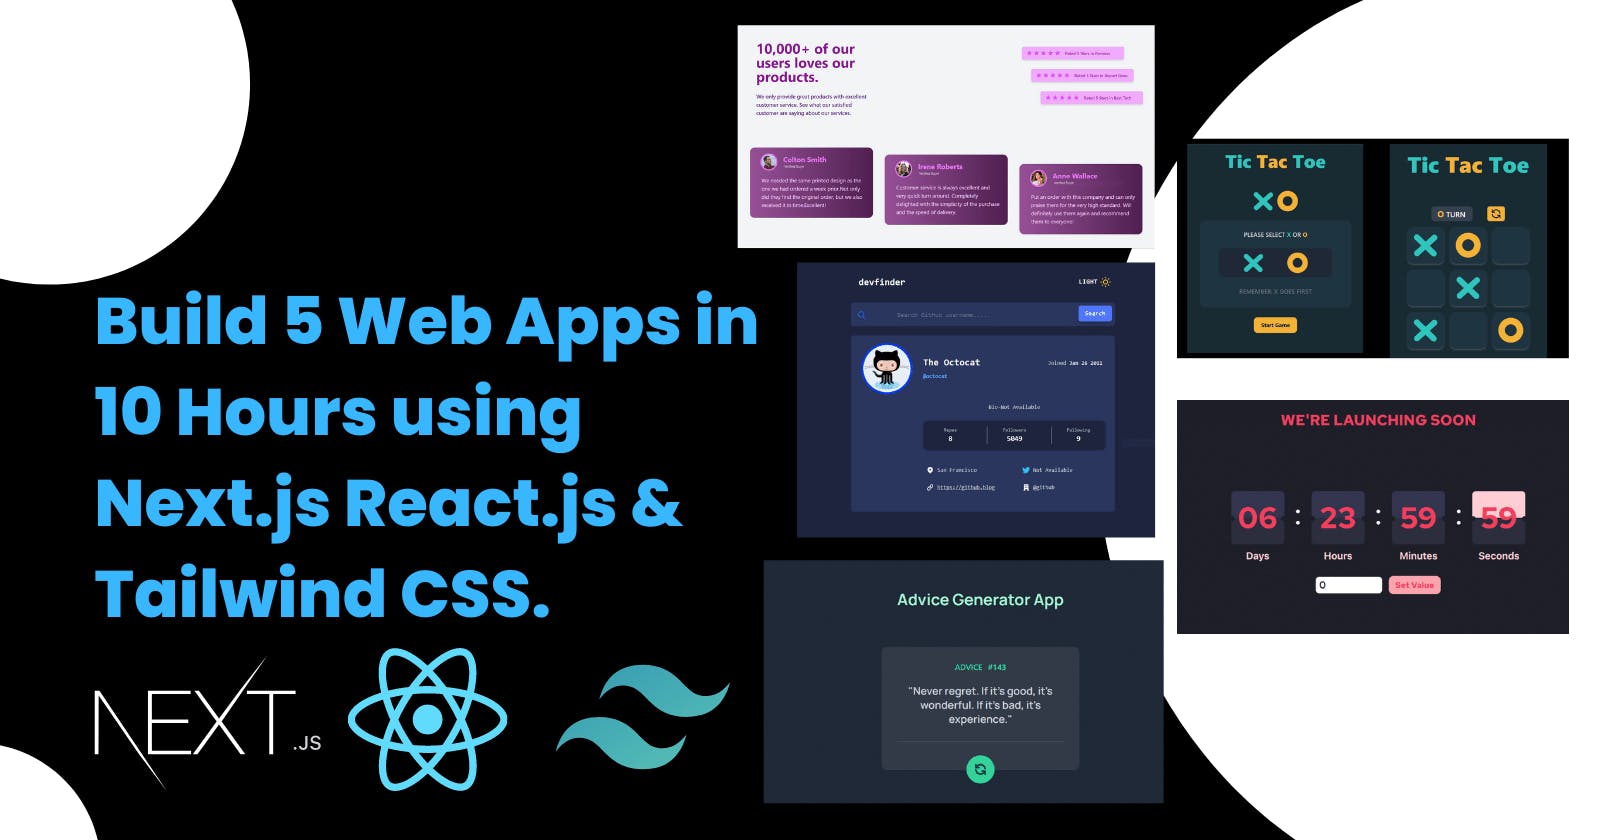 Build 5 Web Apps in 10 Hours using Next.js, React.js & Tailwind CSS.